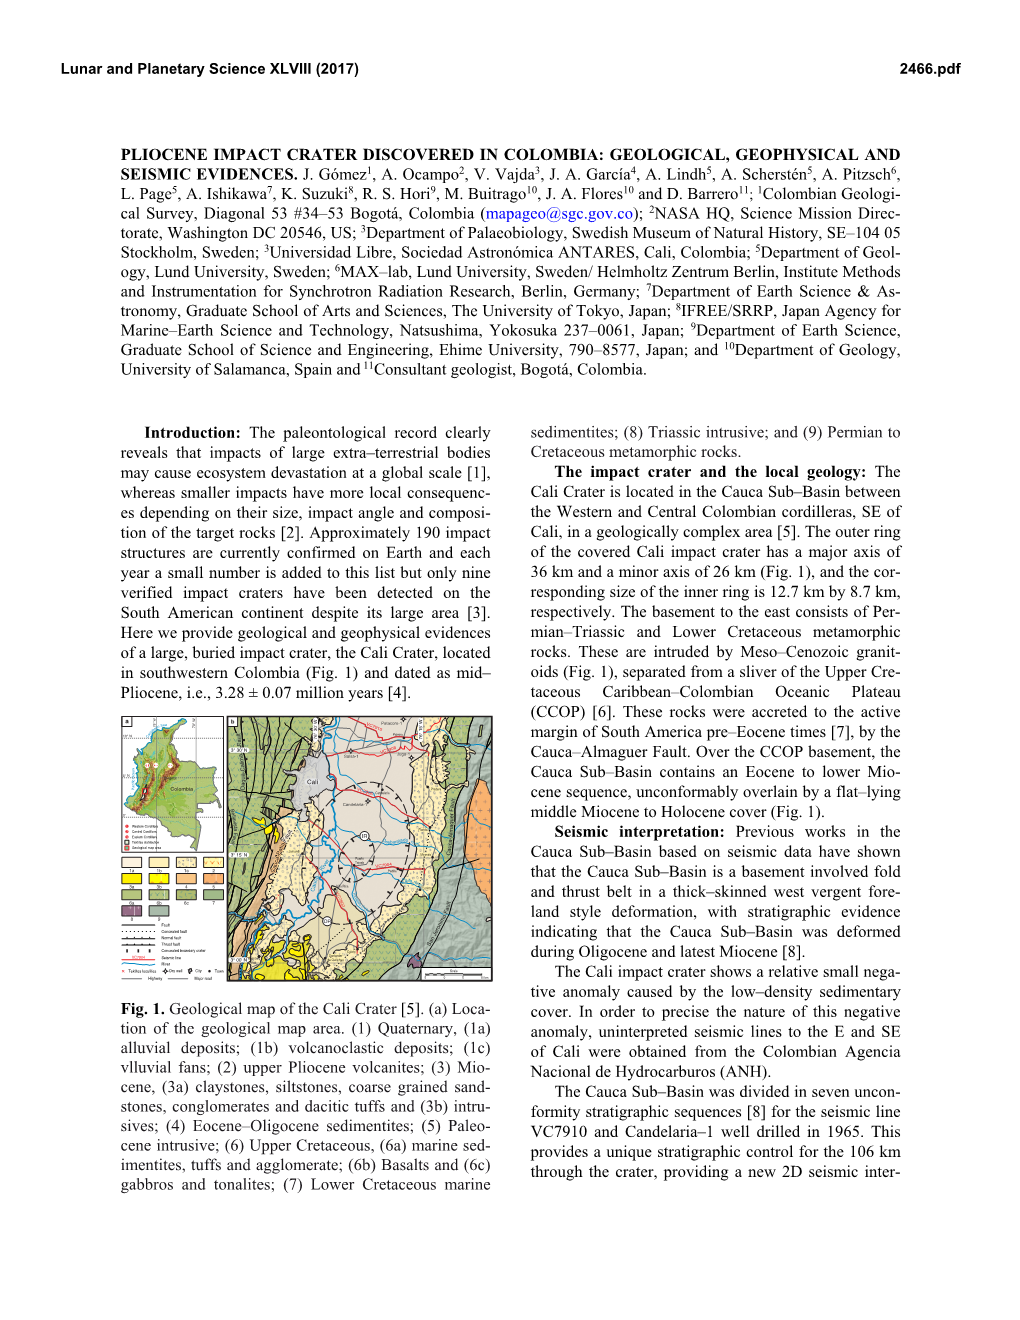 Pliocene Impact Crater Discovered in Colombia: Geological, Geophysical and Seismic Evidences